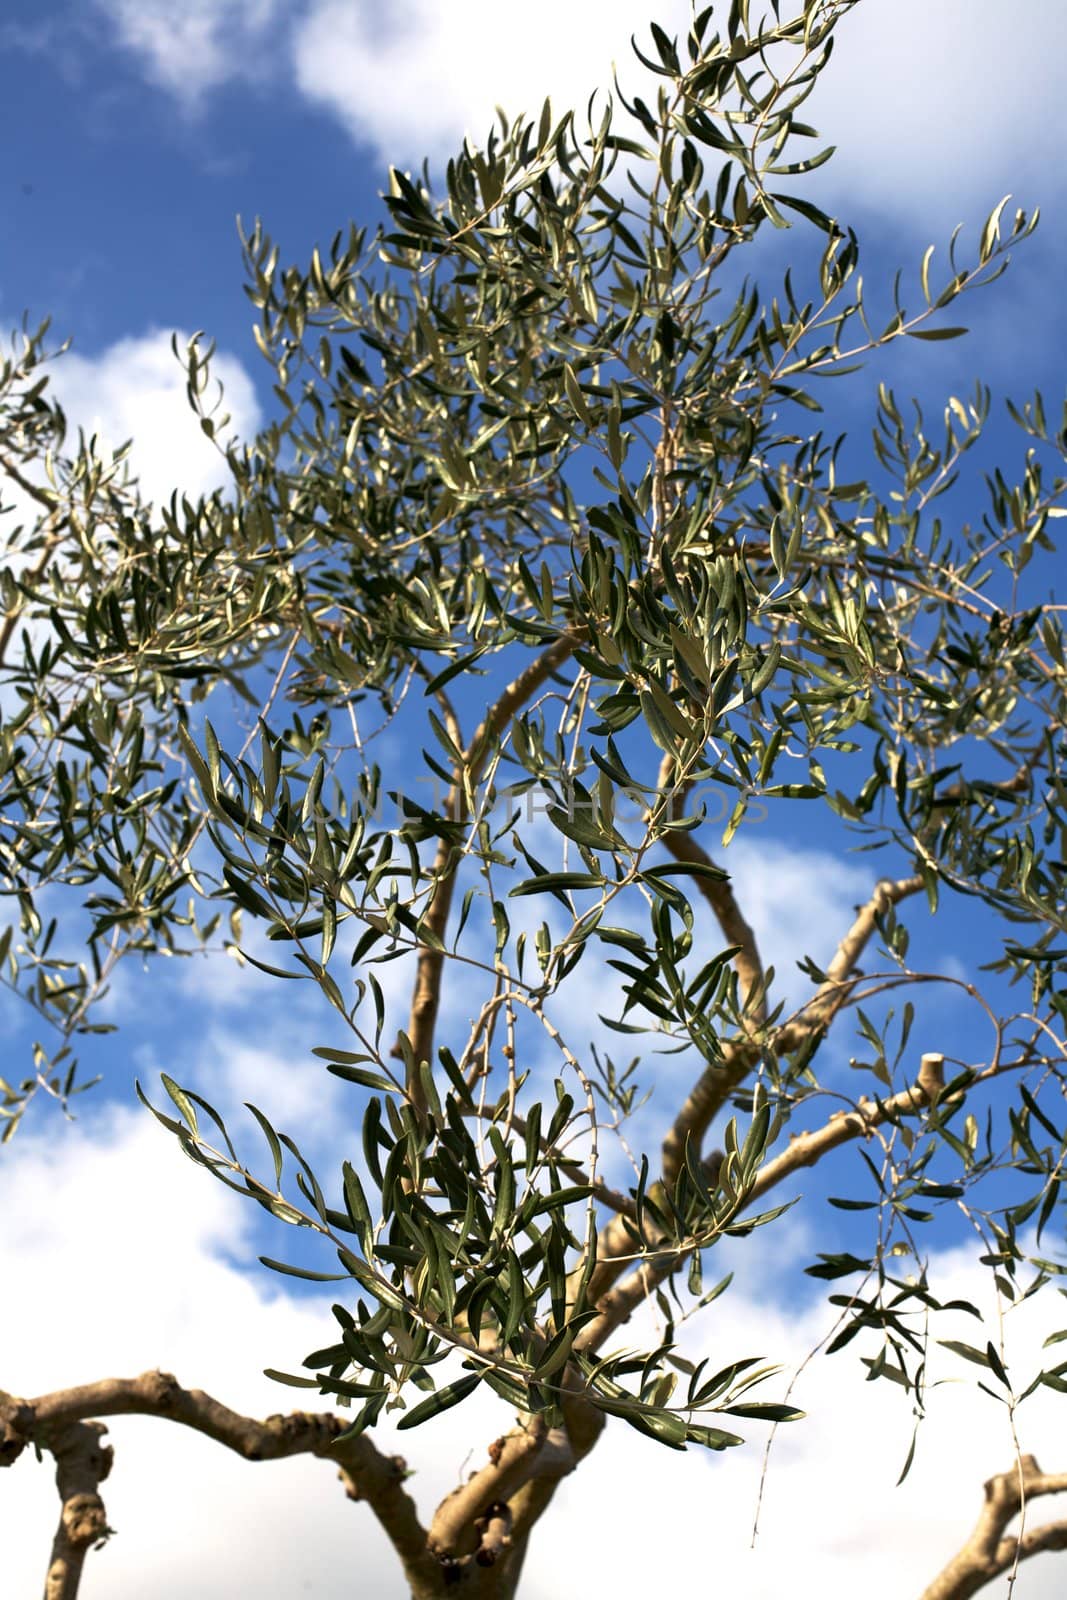 Olive tree leafs with no olives in the winter large  by fmarsicano